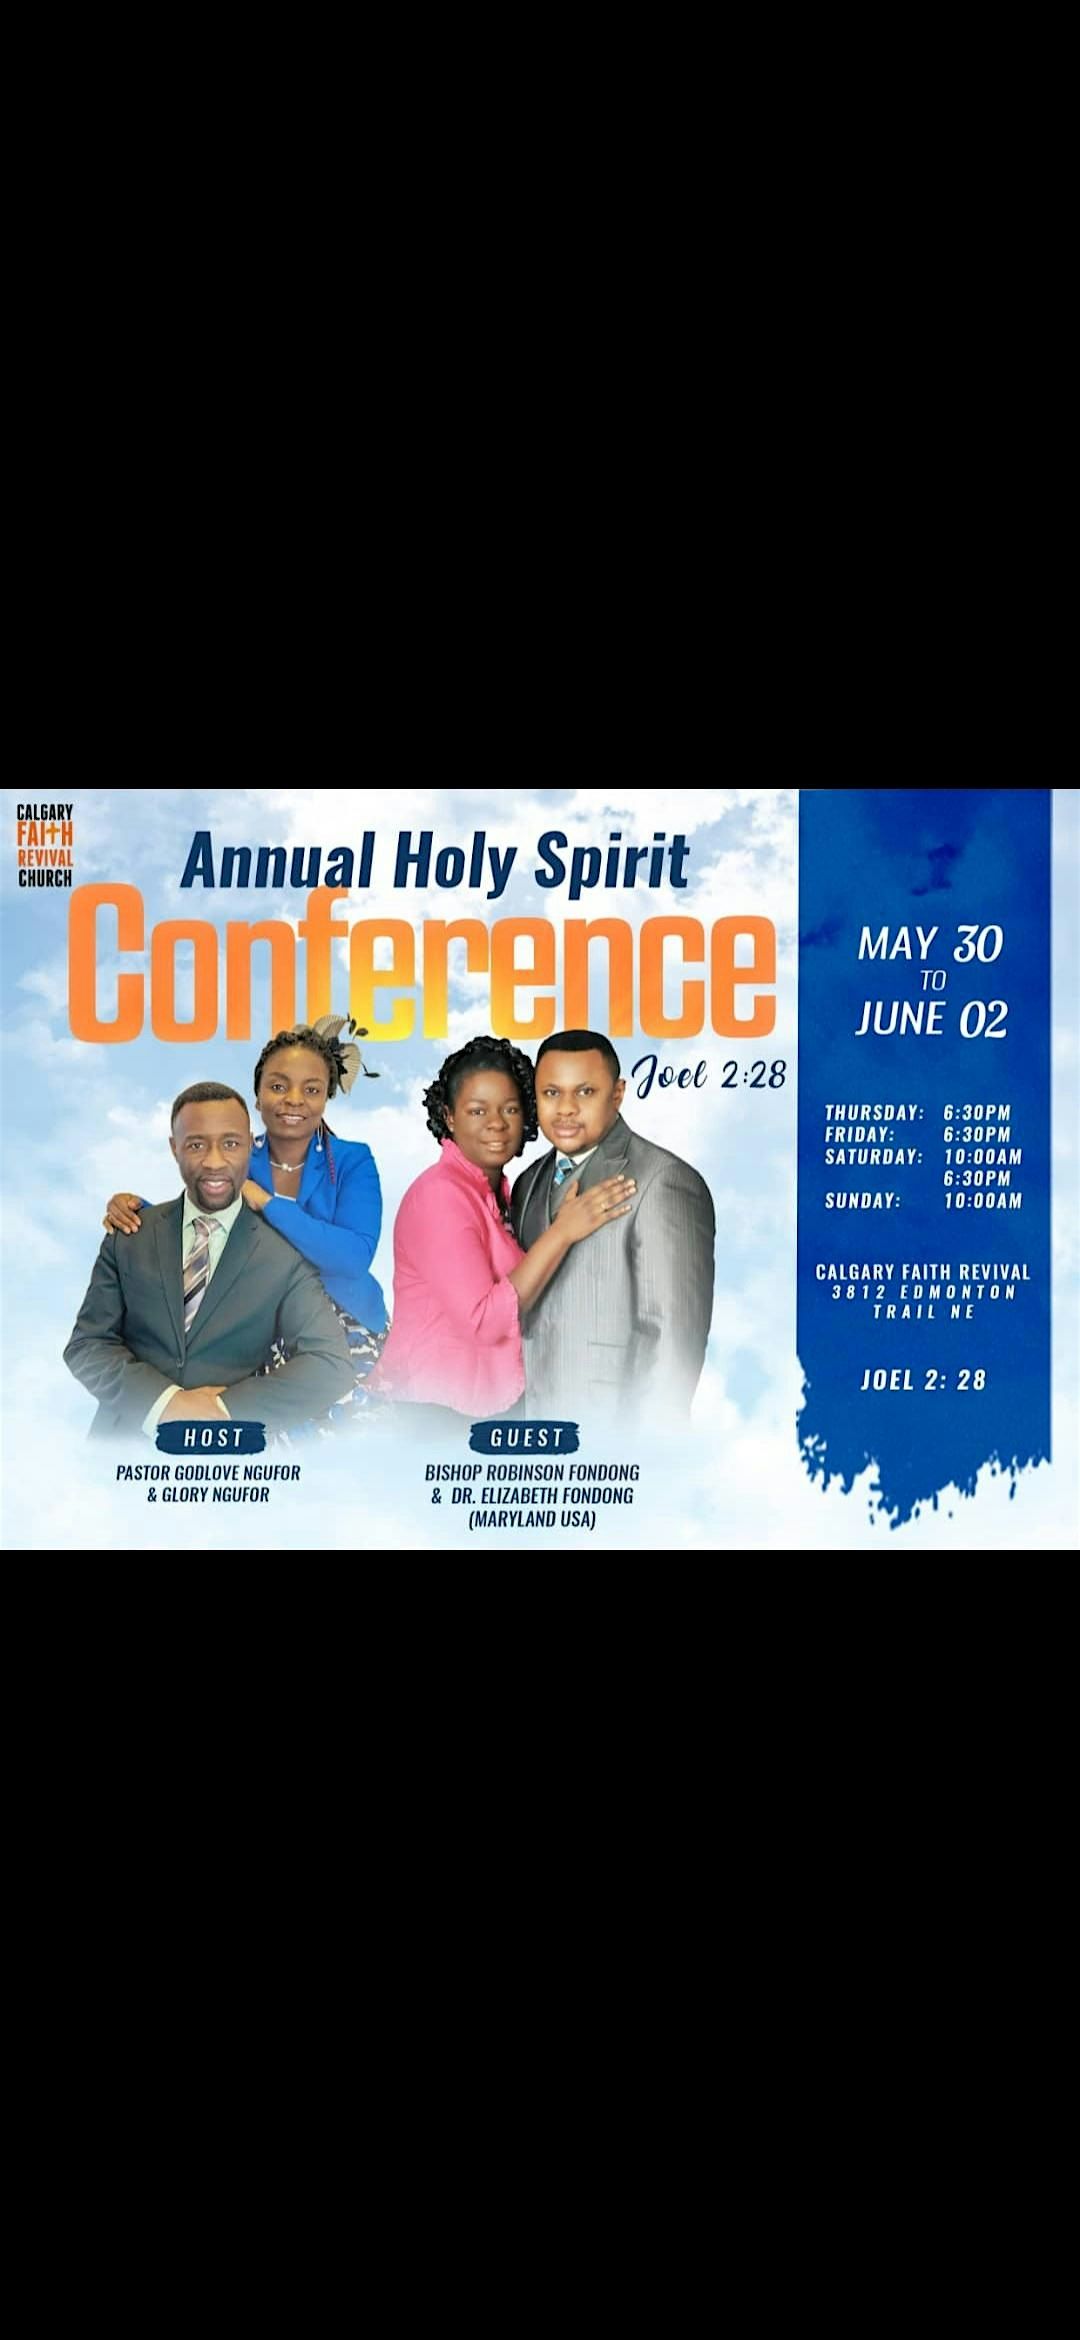 Annual Holy Spirit Conference